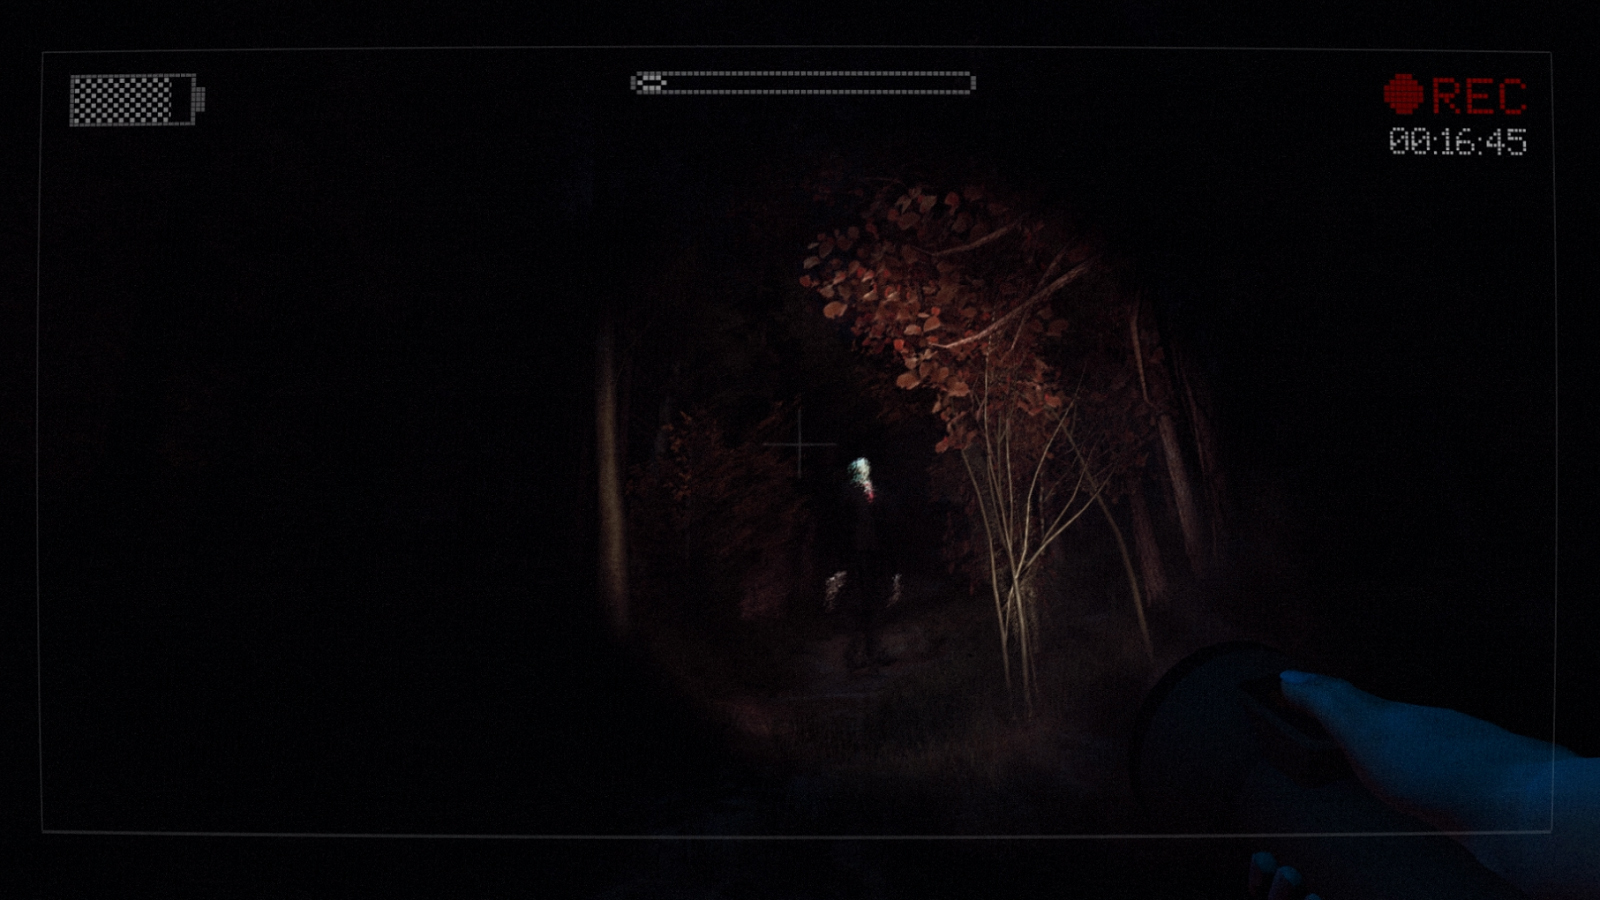 Slender: The Arrival is now available on Steam!